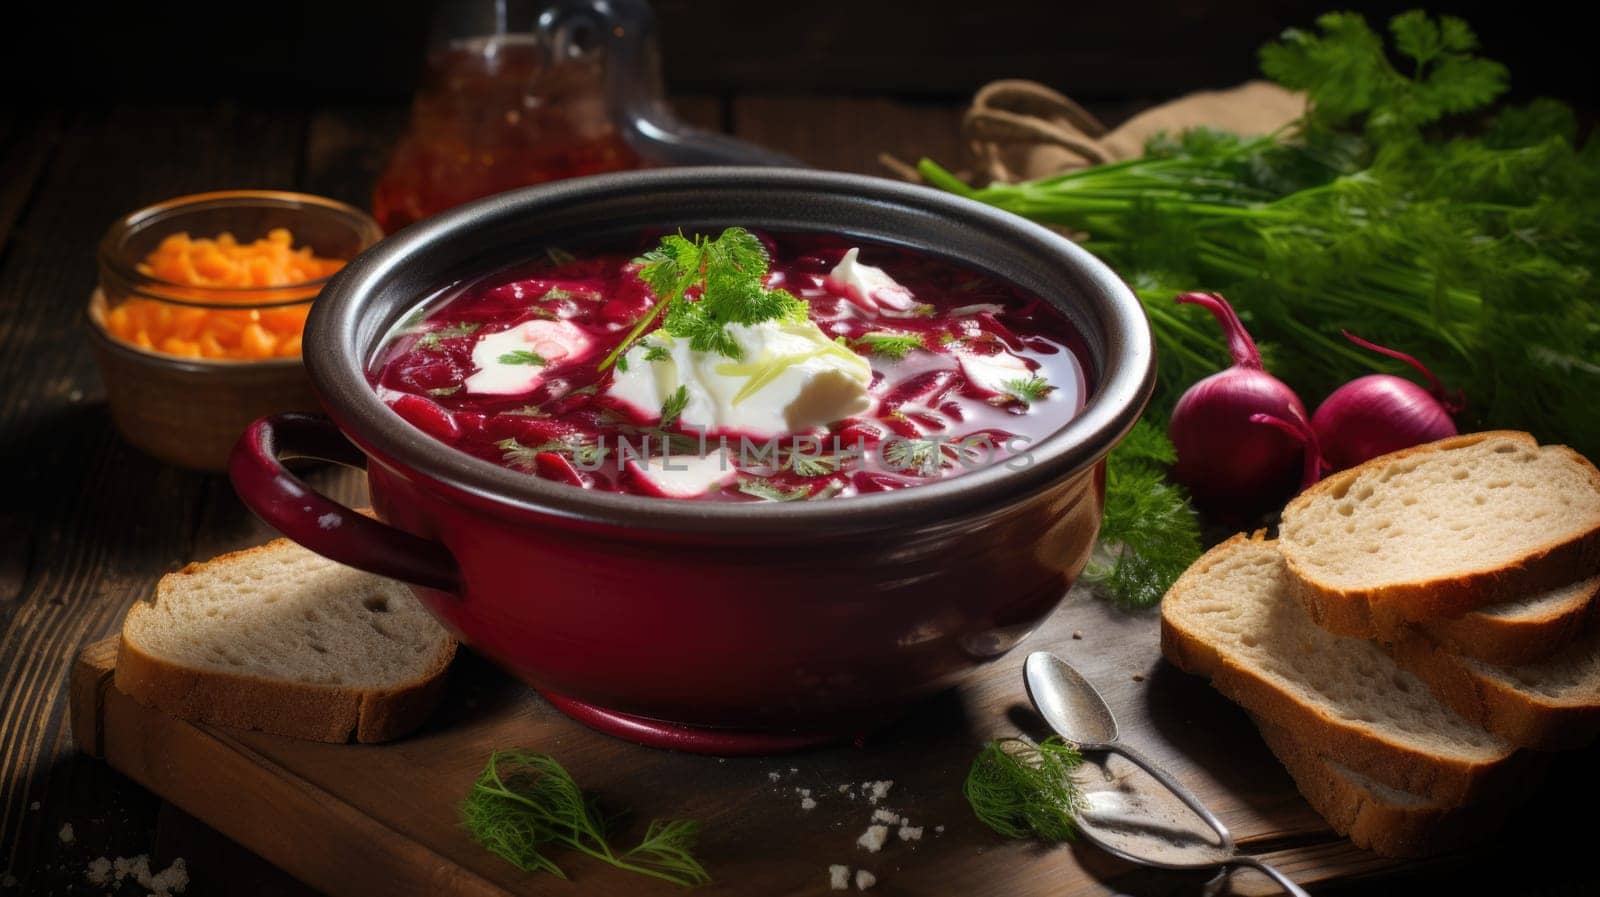 A bowl filled with traditional Borscht soup topped with sour cream and a medley of colorful vegetables.